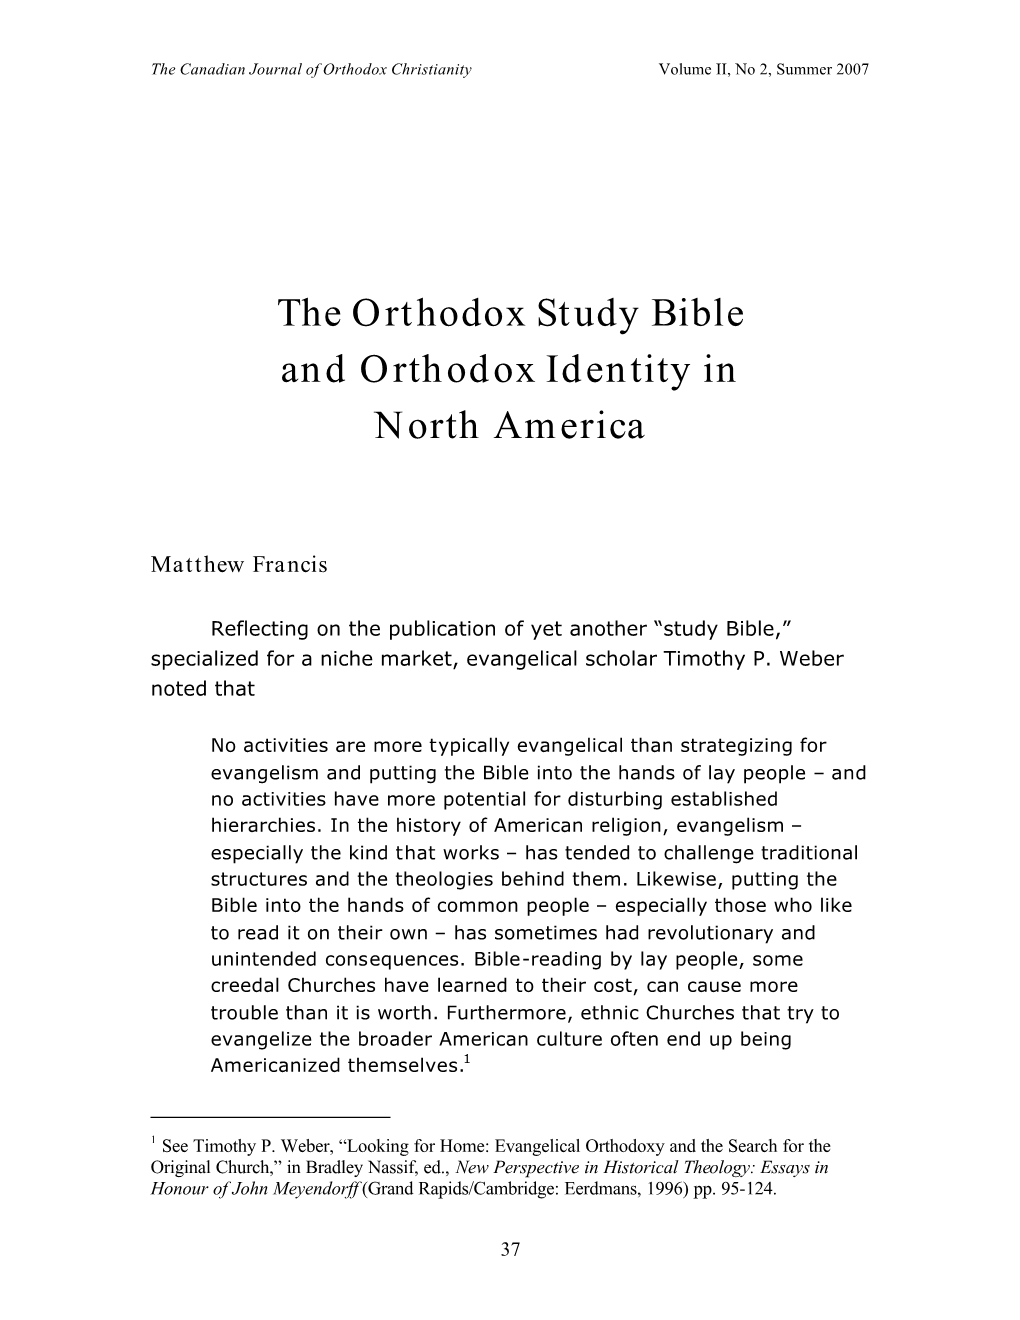 The Orthodox Study Bible and Orthodox Identity in North America